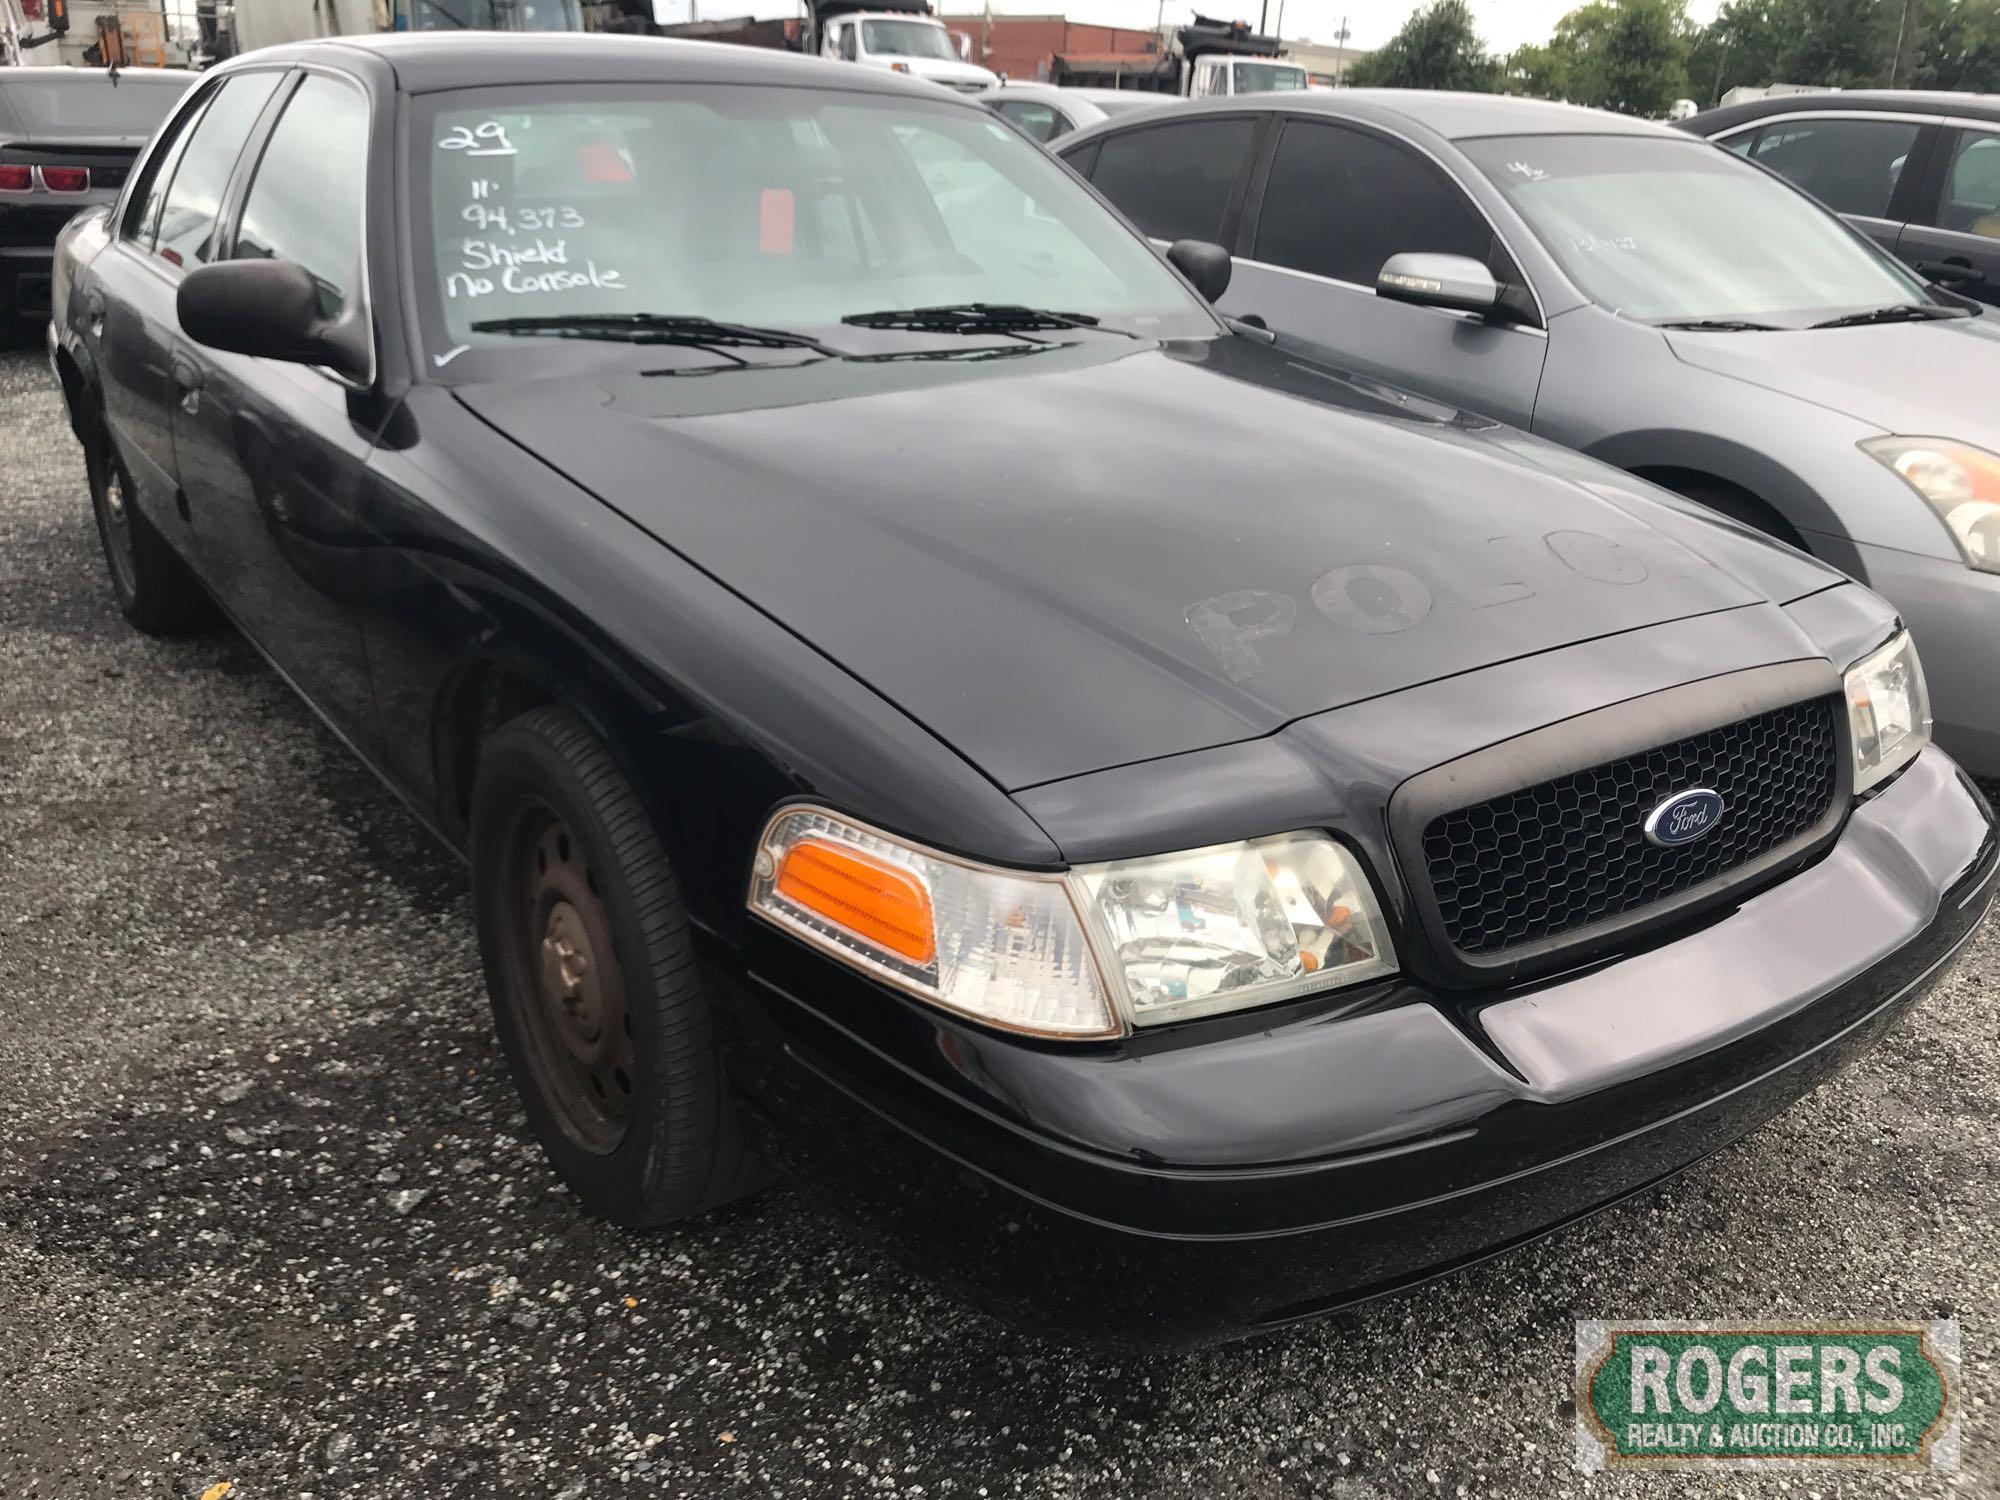 2011 Ford Crown Vic, 4.6, 94373 miles, Has Shield, No Console, 2FABP7BV1BX154331